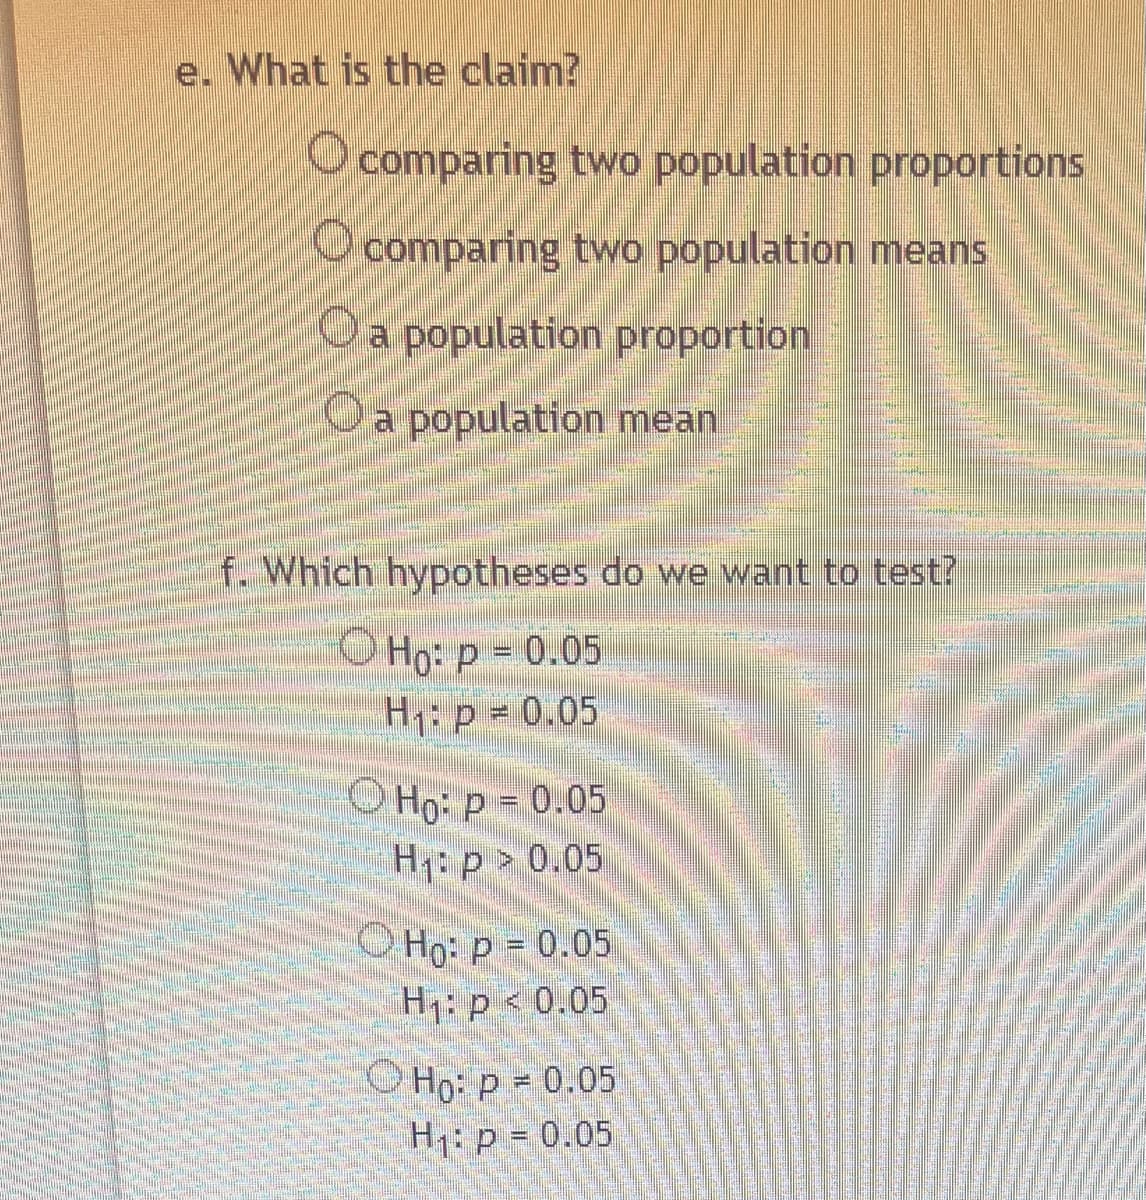 e. What is the claim?
O comparing two population proportions
comparing two population means
O a population proportion
O a population mean
f. Which hypotheses do we want to test?
Ho: p = 0.05
H₁: p = 0.05
O Ho: P = 0.05
H₁: p > 0.05
Ho: p = 0.05
H₁: p < 0.05
Ho: p = 0.05
H₁: p = 0.05